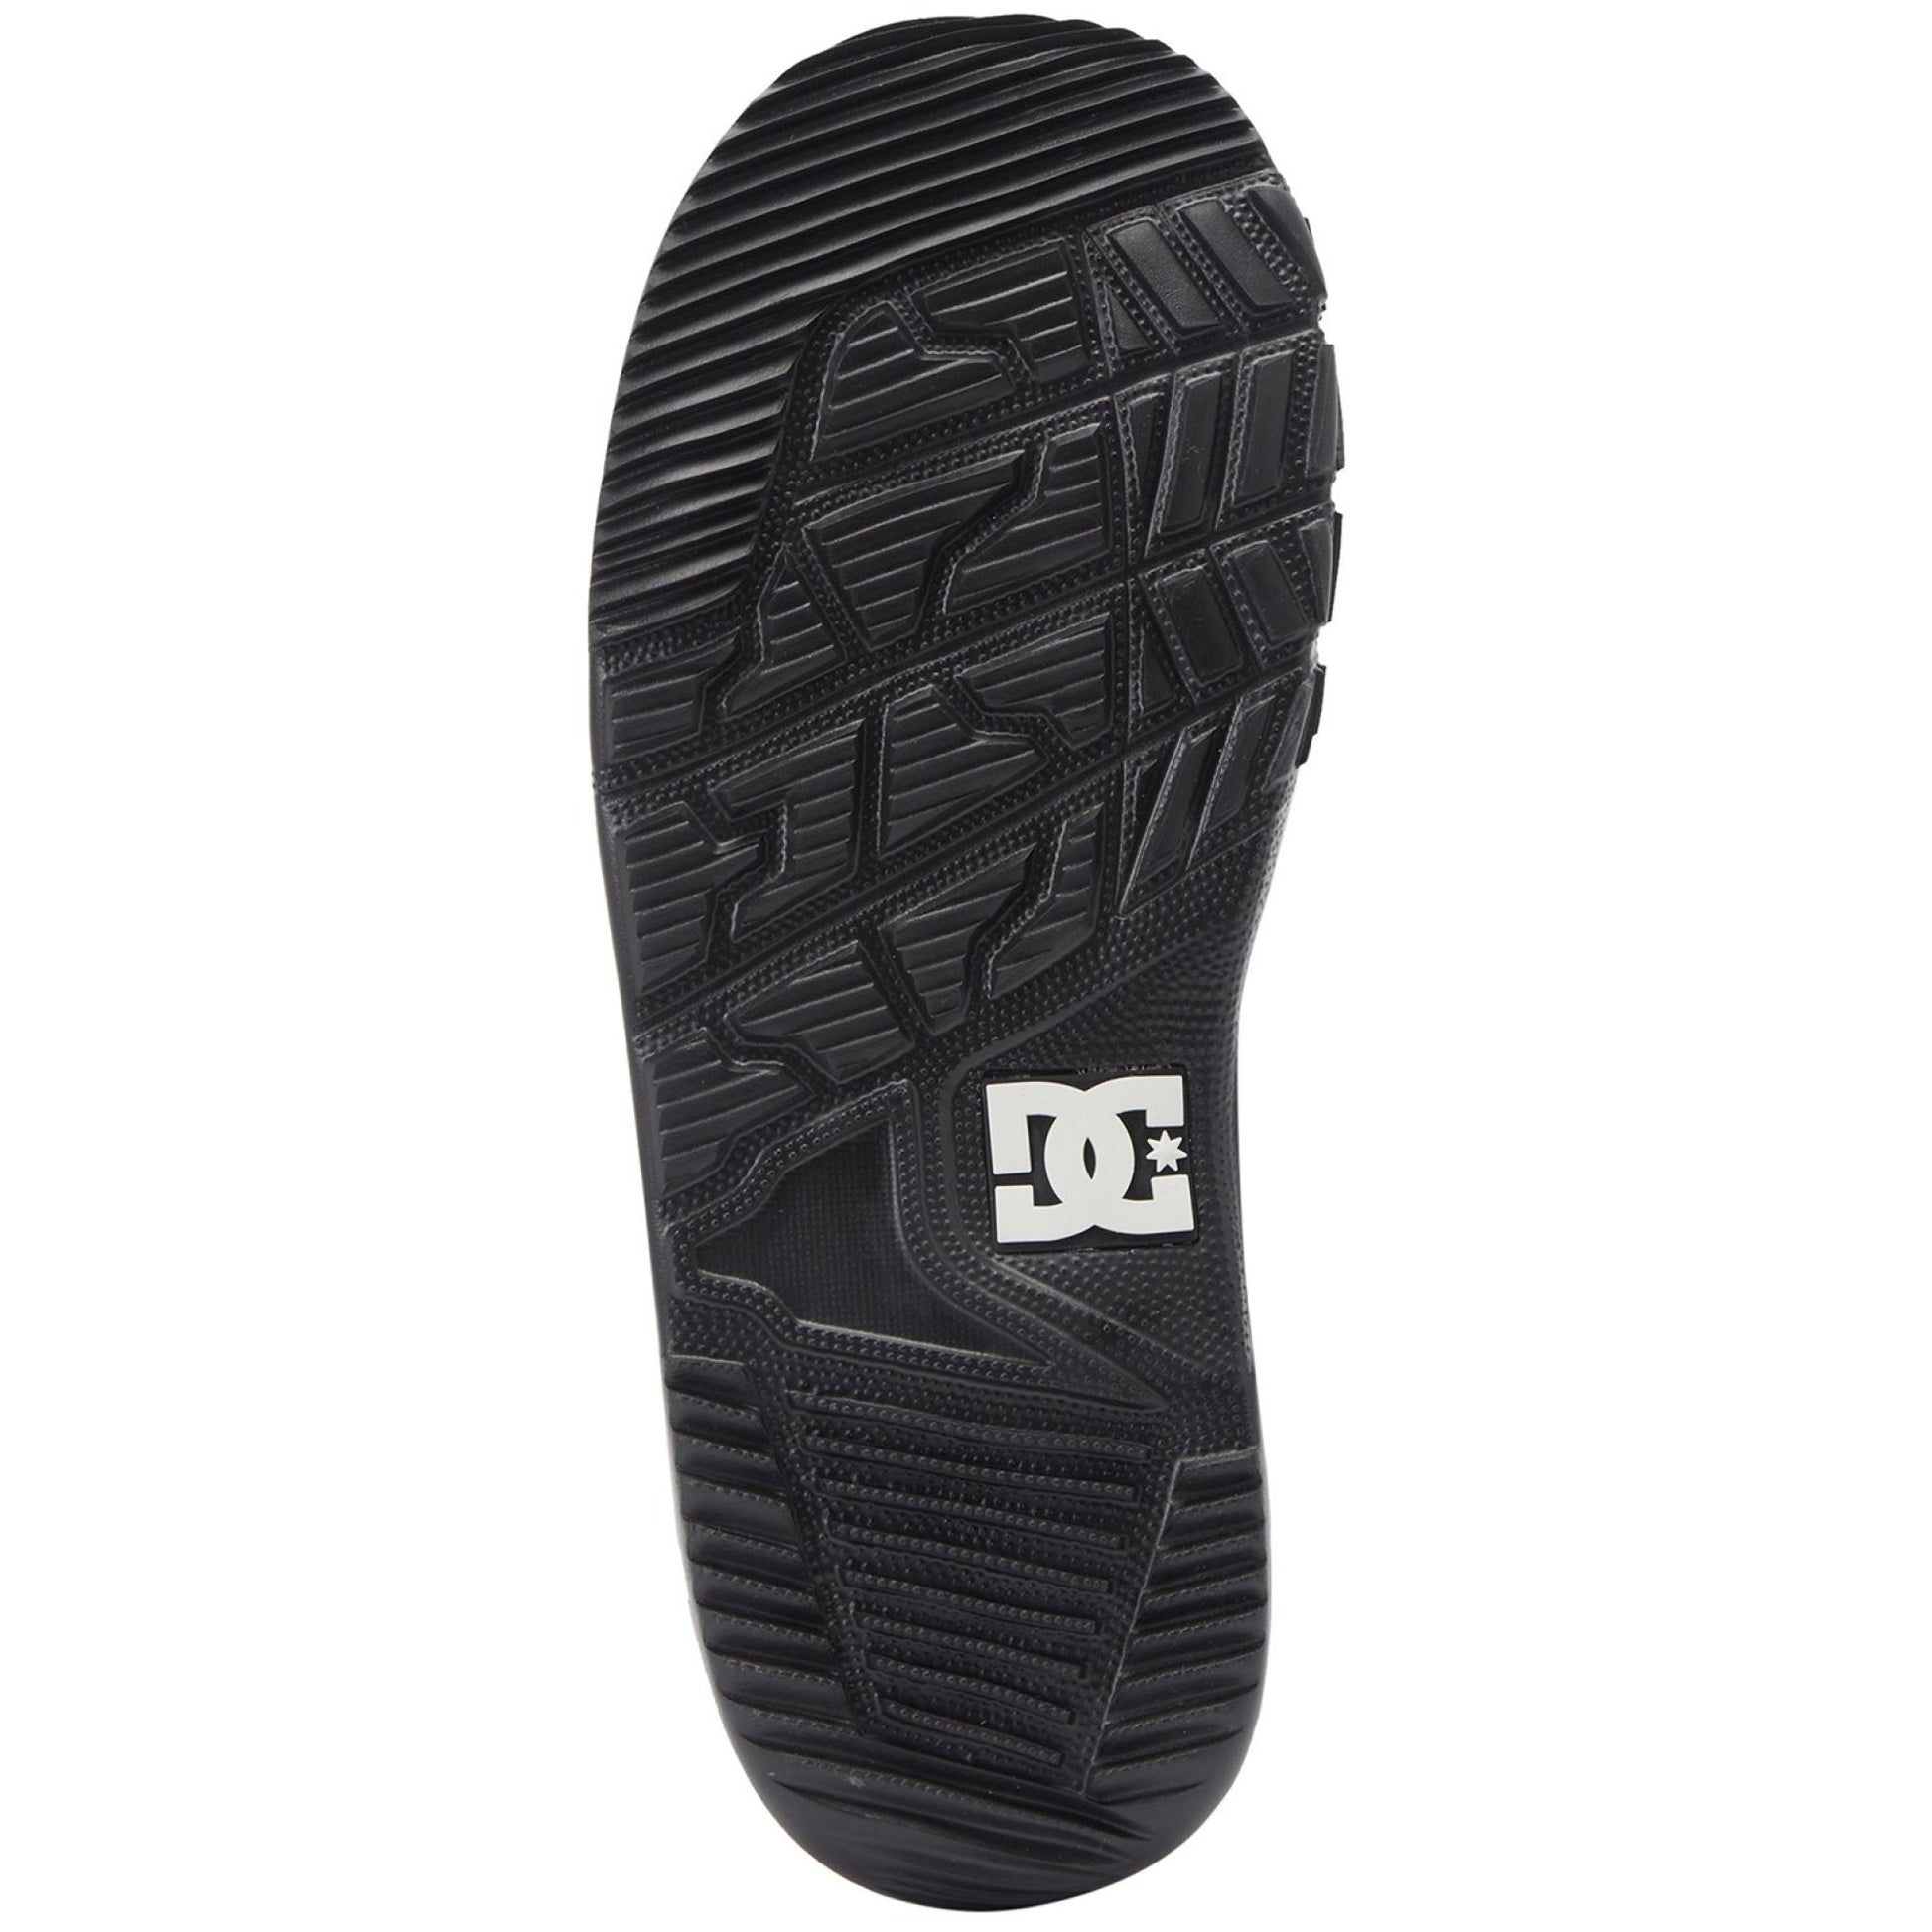 DC Phase Snowboard Boots Black White - DC Snowboard Boots